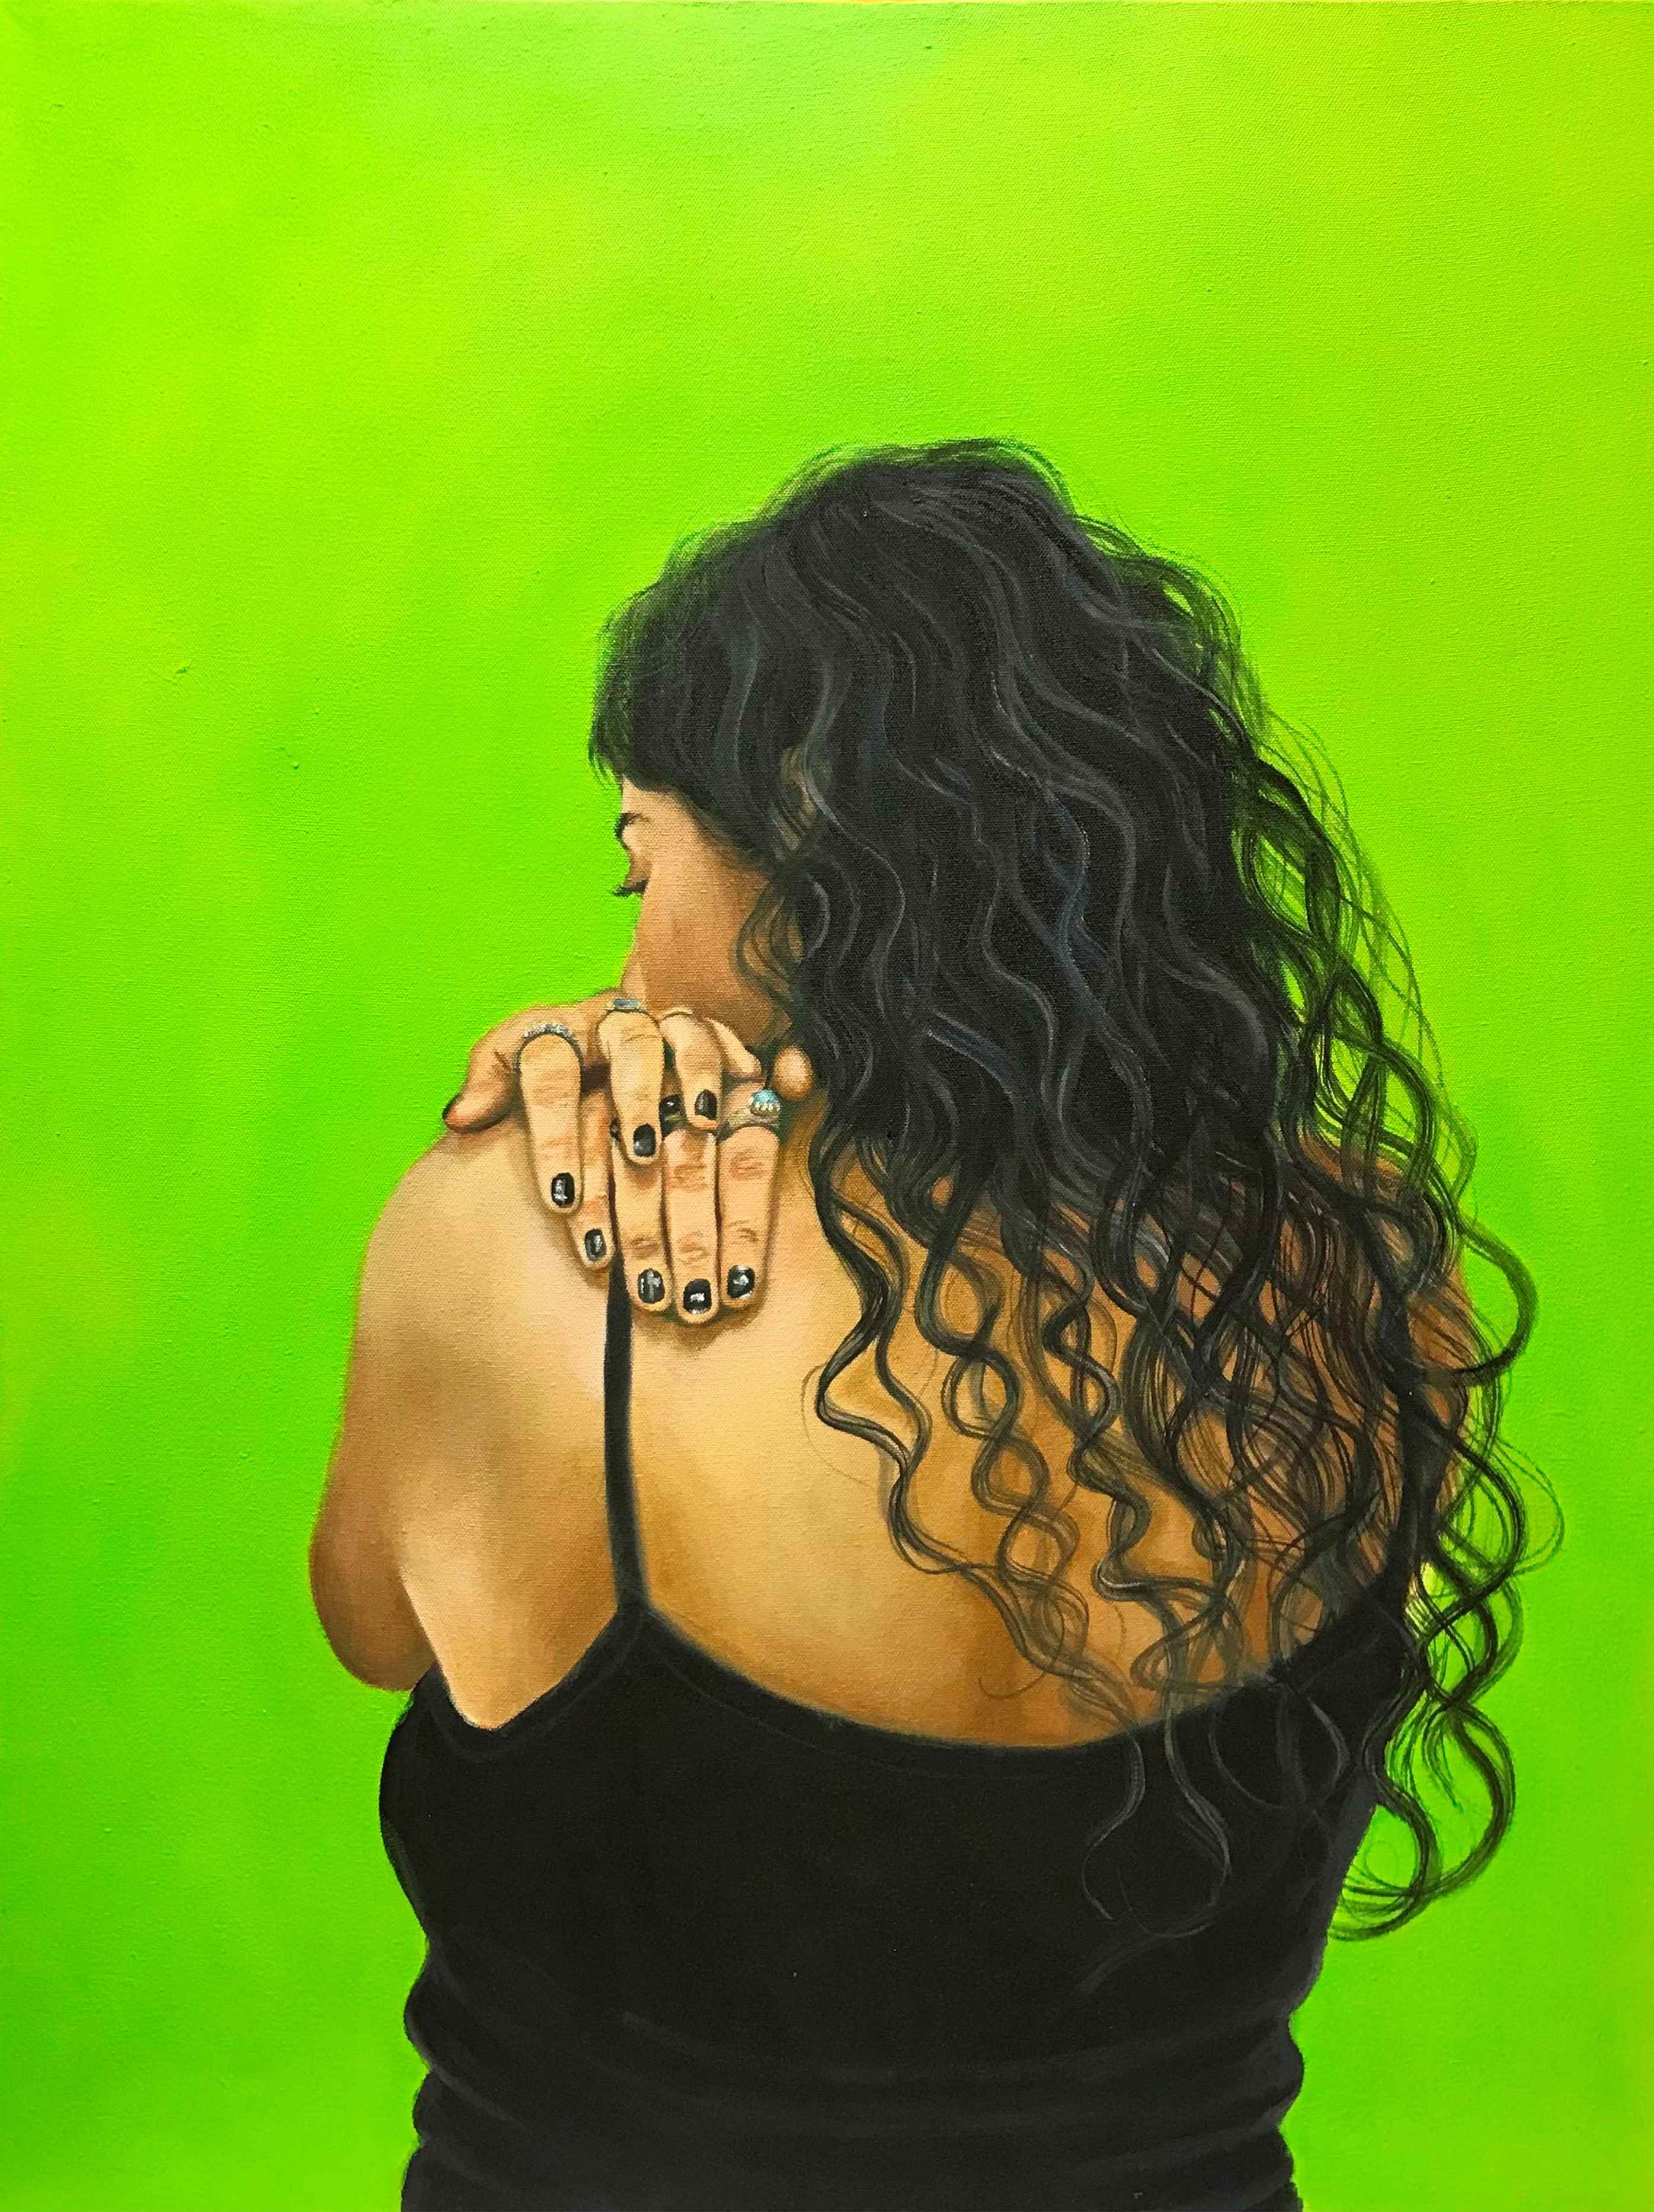 Artist:  Erum Akhtar <br> Title:   INTROSPECTION III  <br> Medium: Oil on canvas<br> Size: 30x24 inches